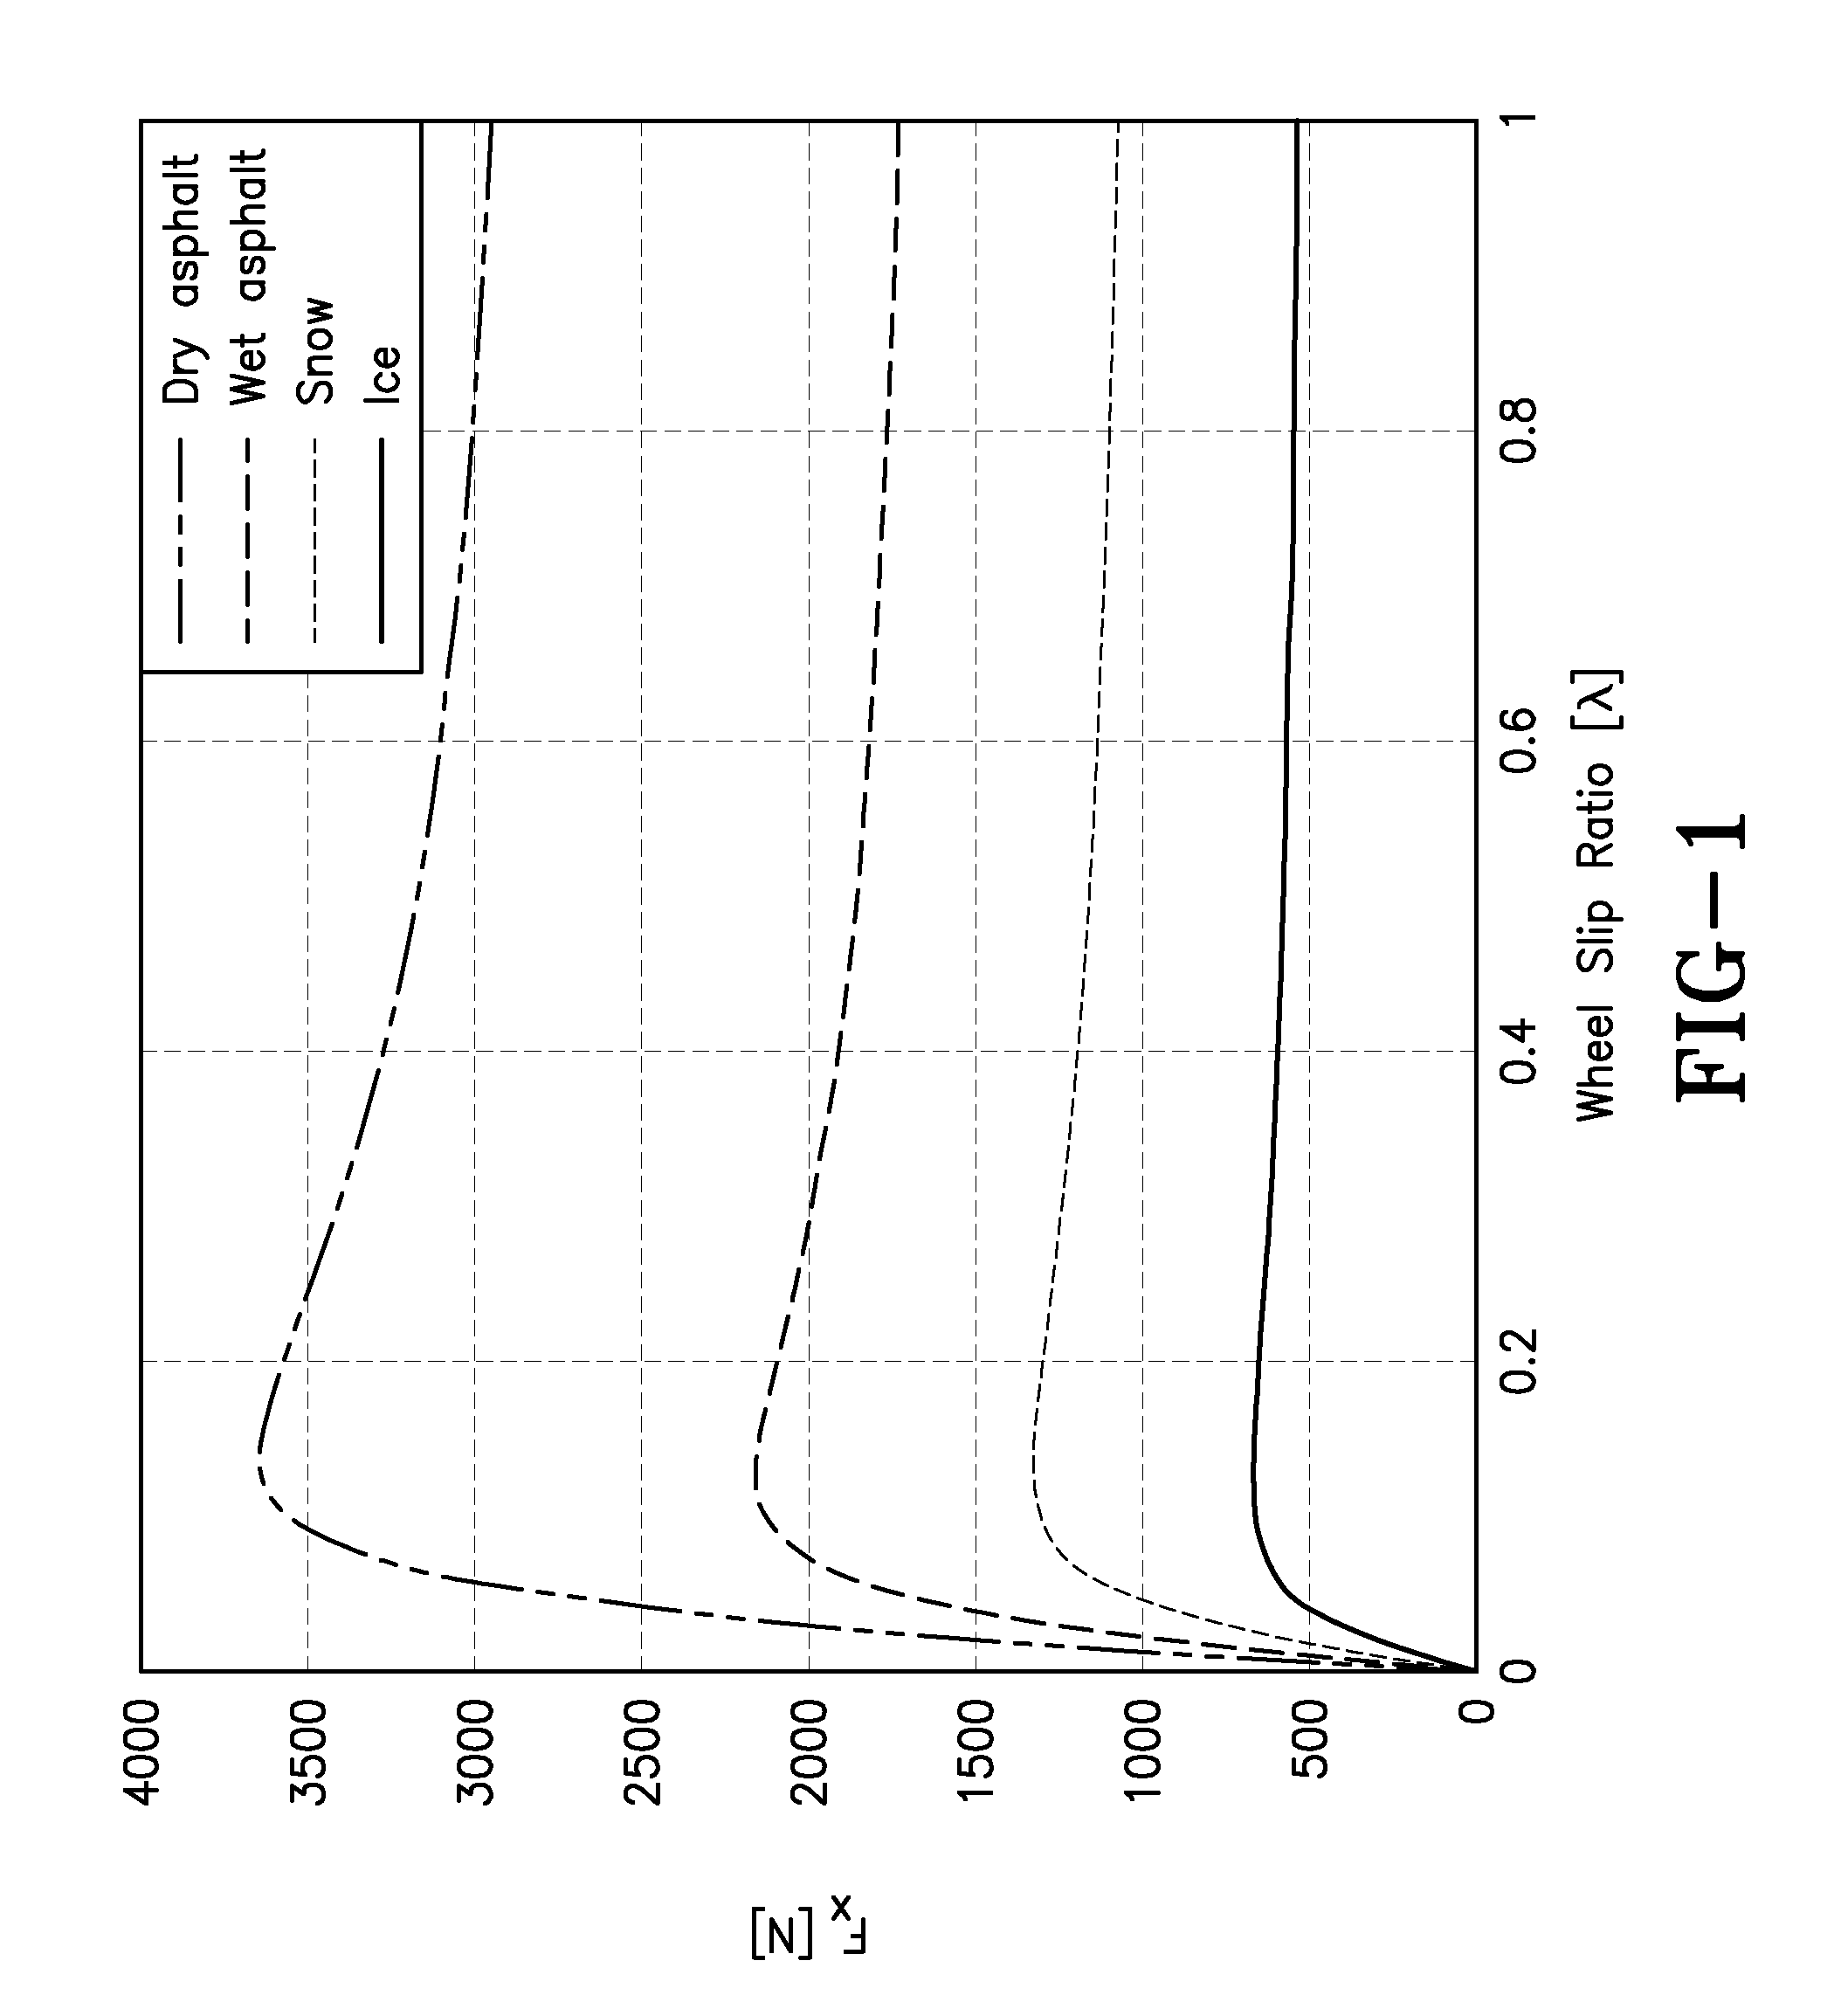 Road surface friction and surface type estimation system and method